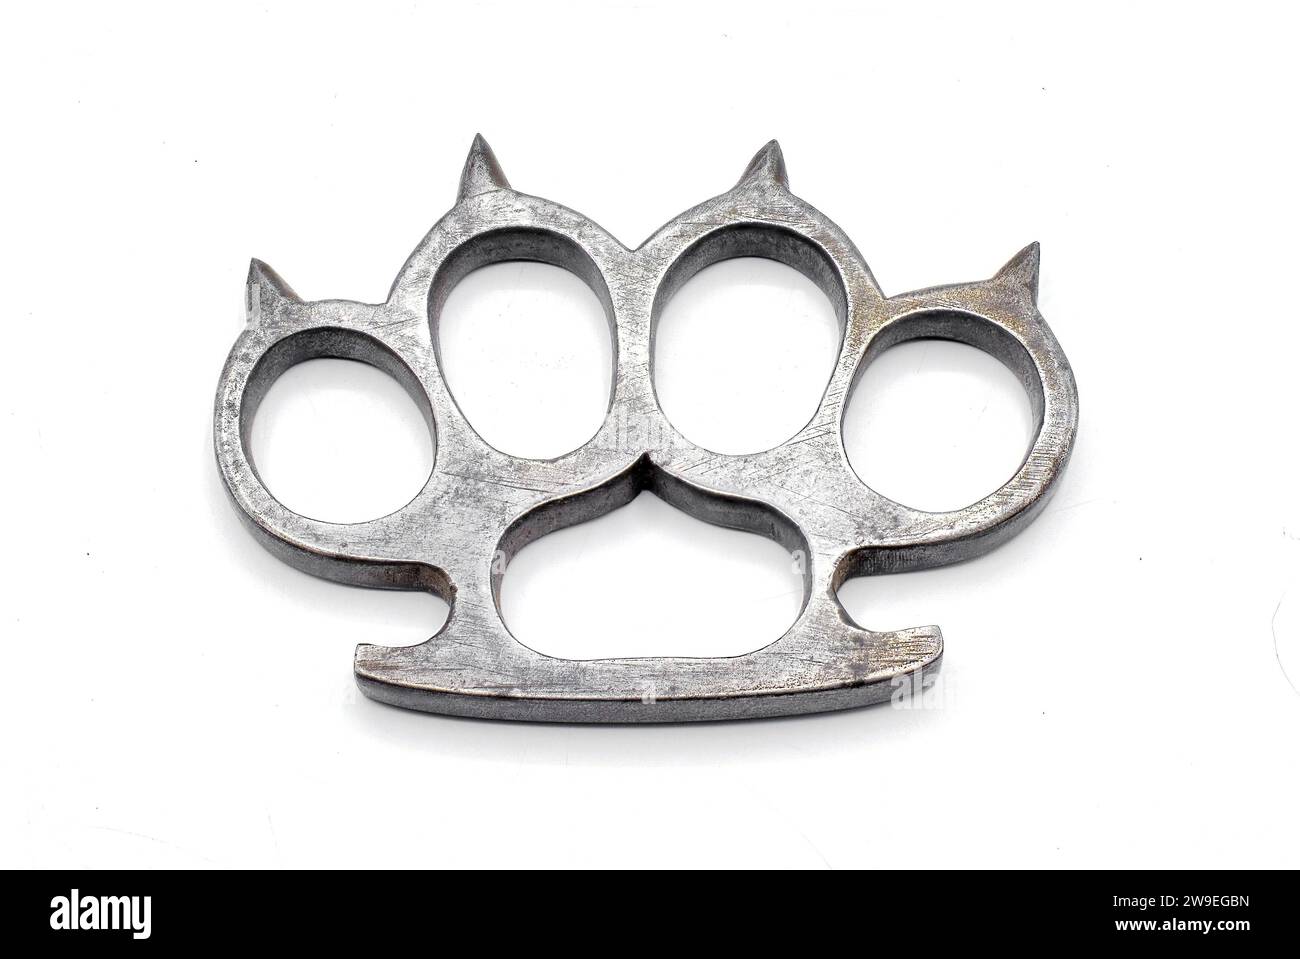 Thai Brass Knuckle-duster On White Stock Photo, Picture and